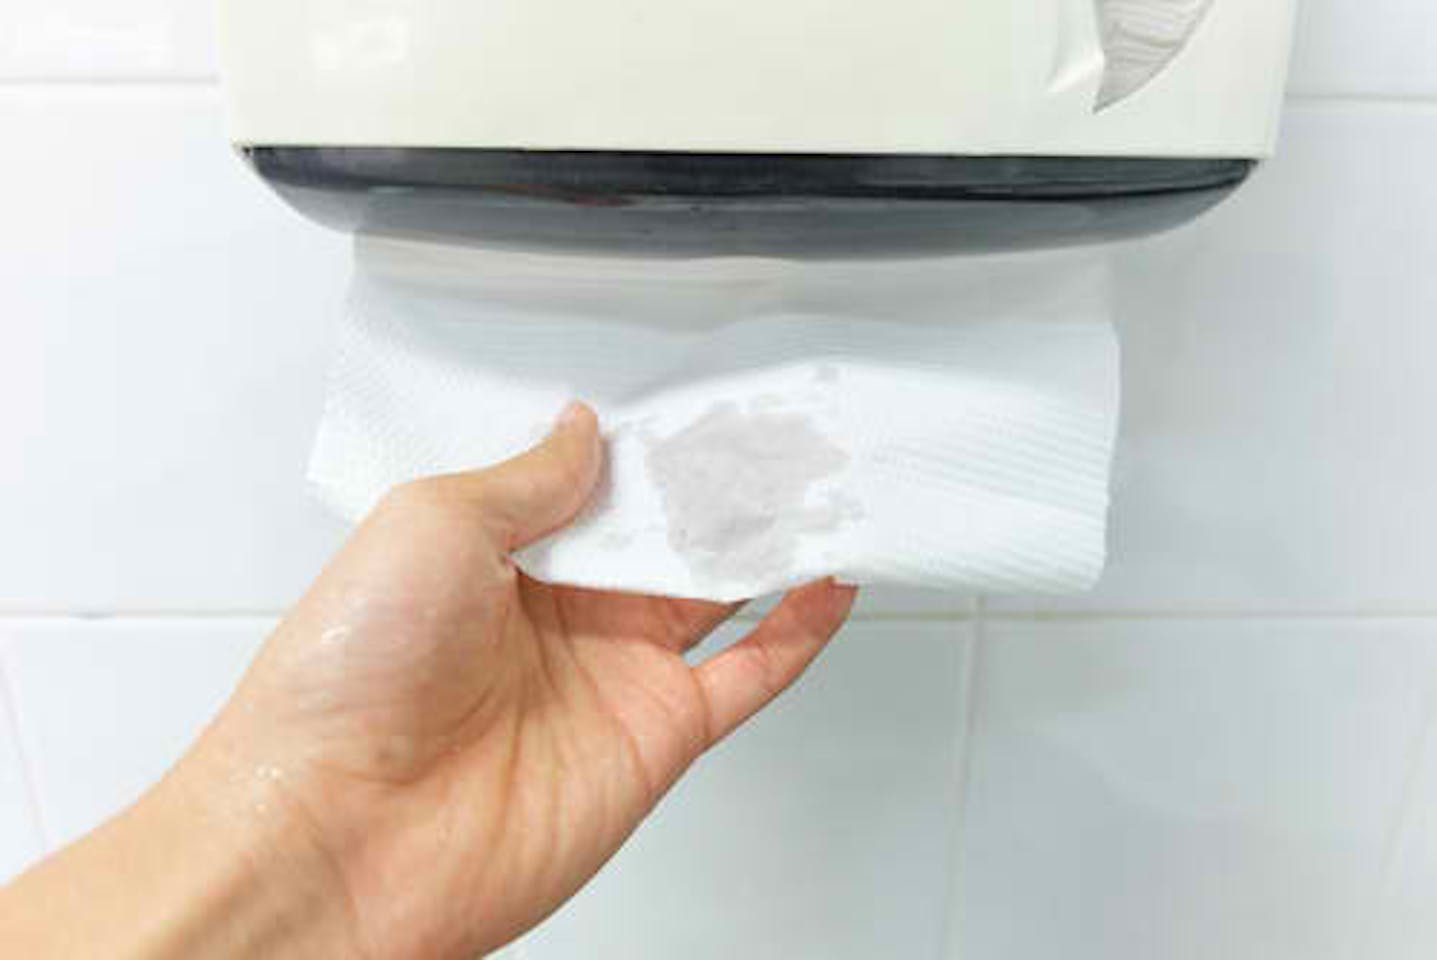 Hand Drying Pain Points: Paper Towels or Electric Dryers? - gb&d